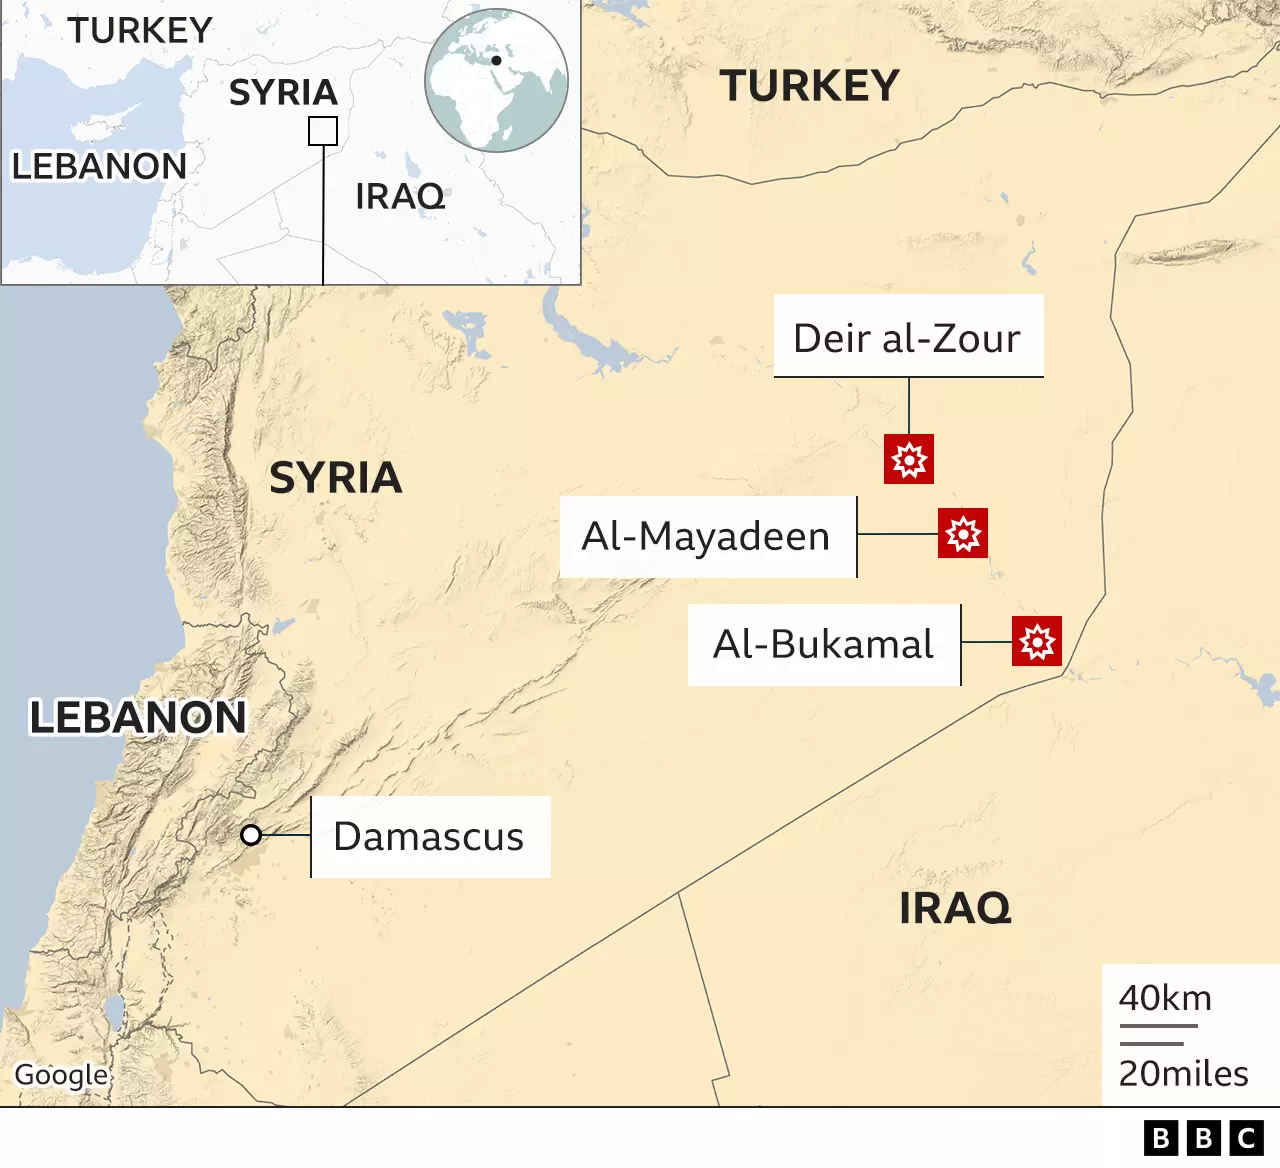 Following a fatal drone strike, the US attacks targets in Syria.